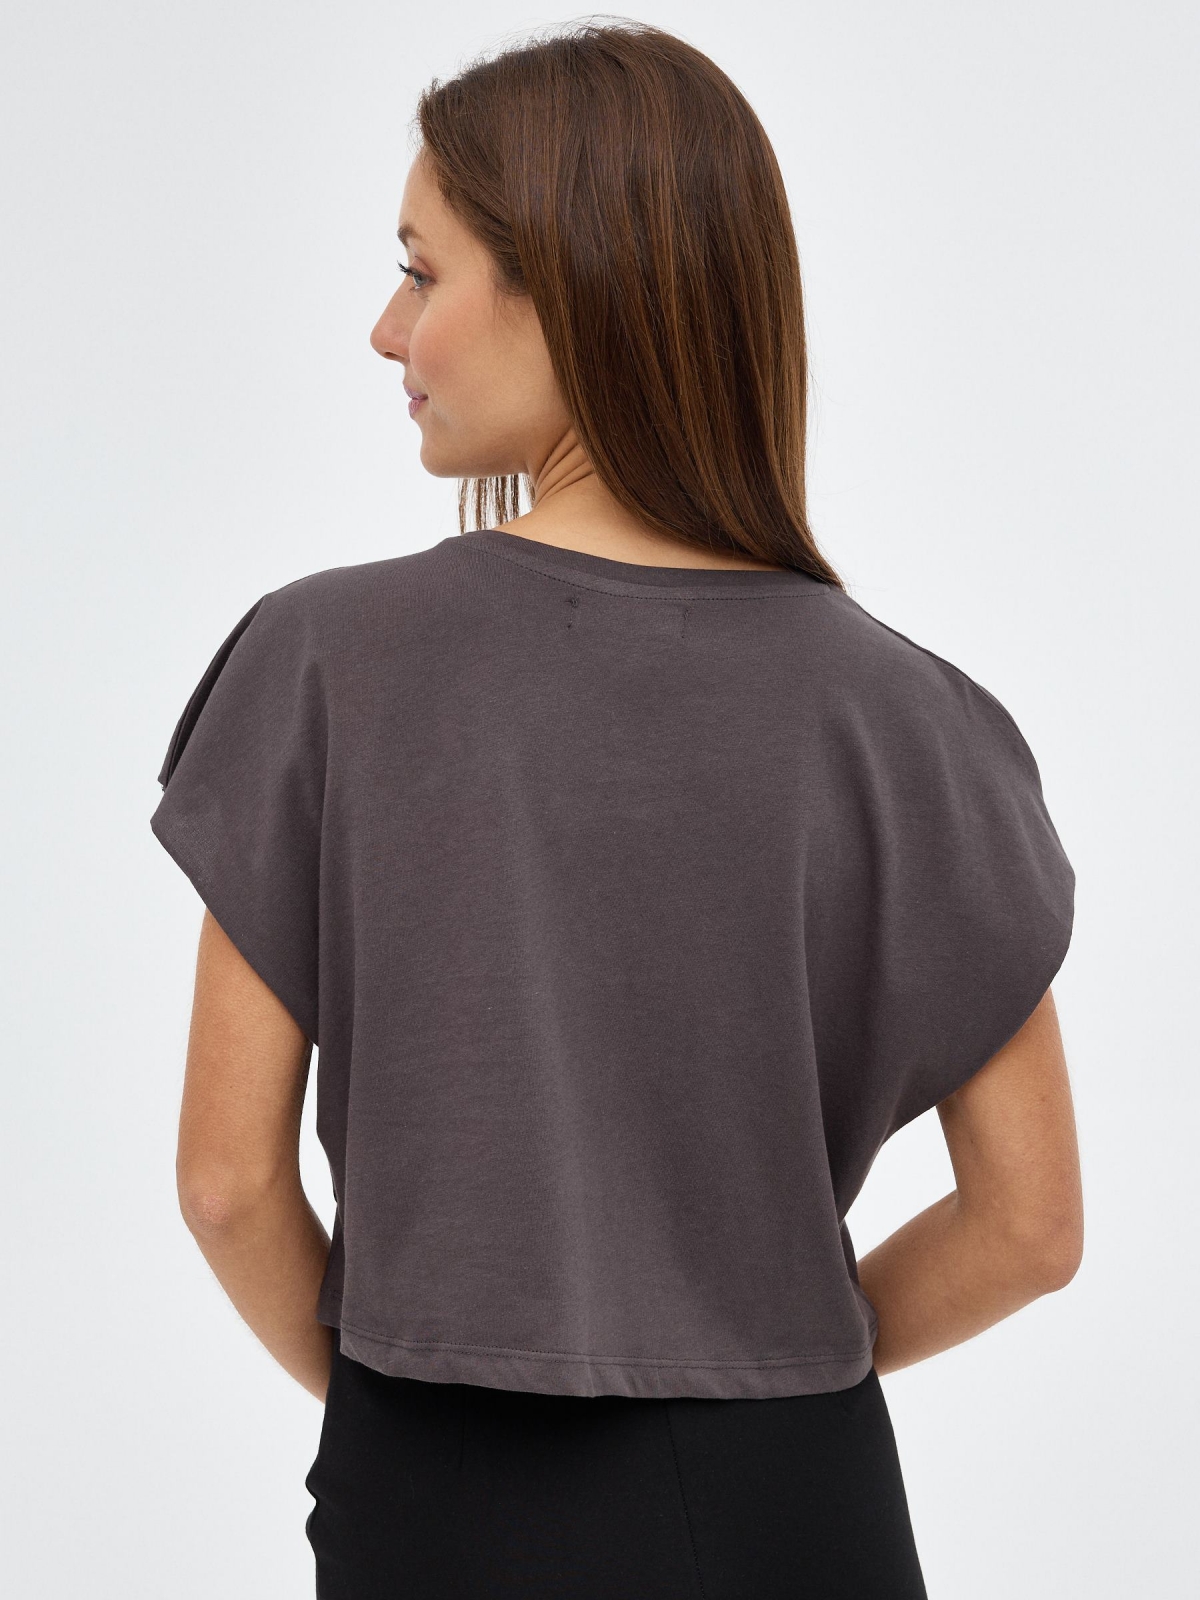 Sense of Space T-shirt dark grey middle back view